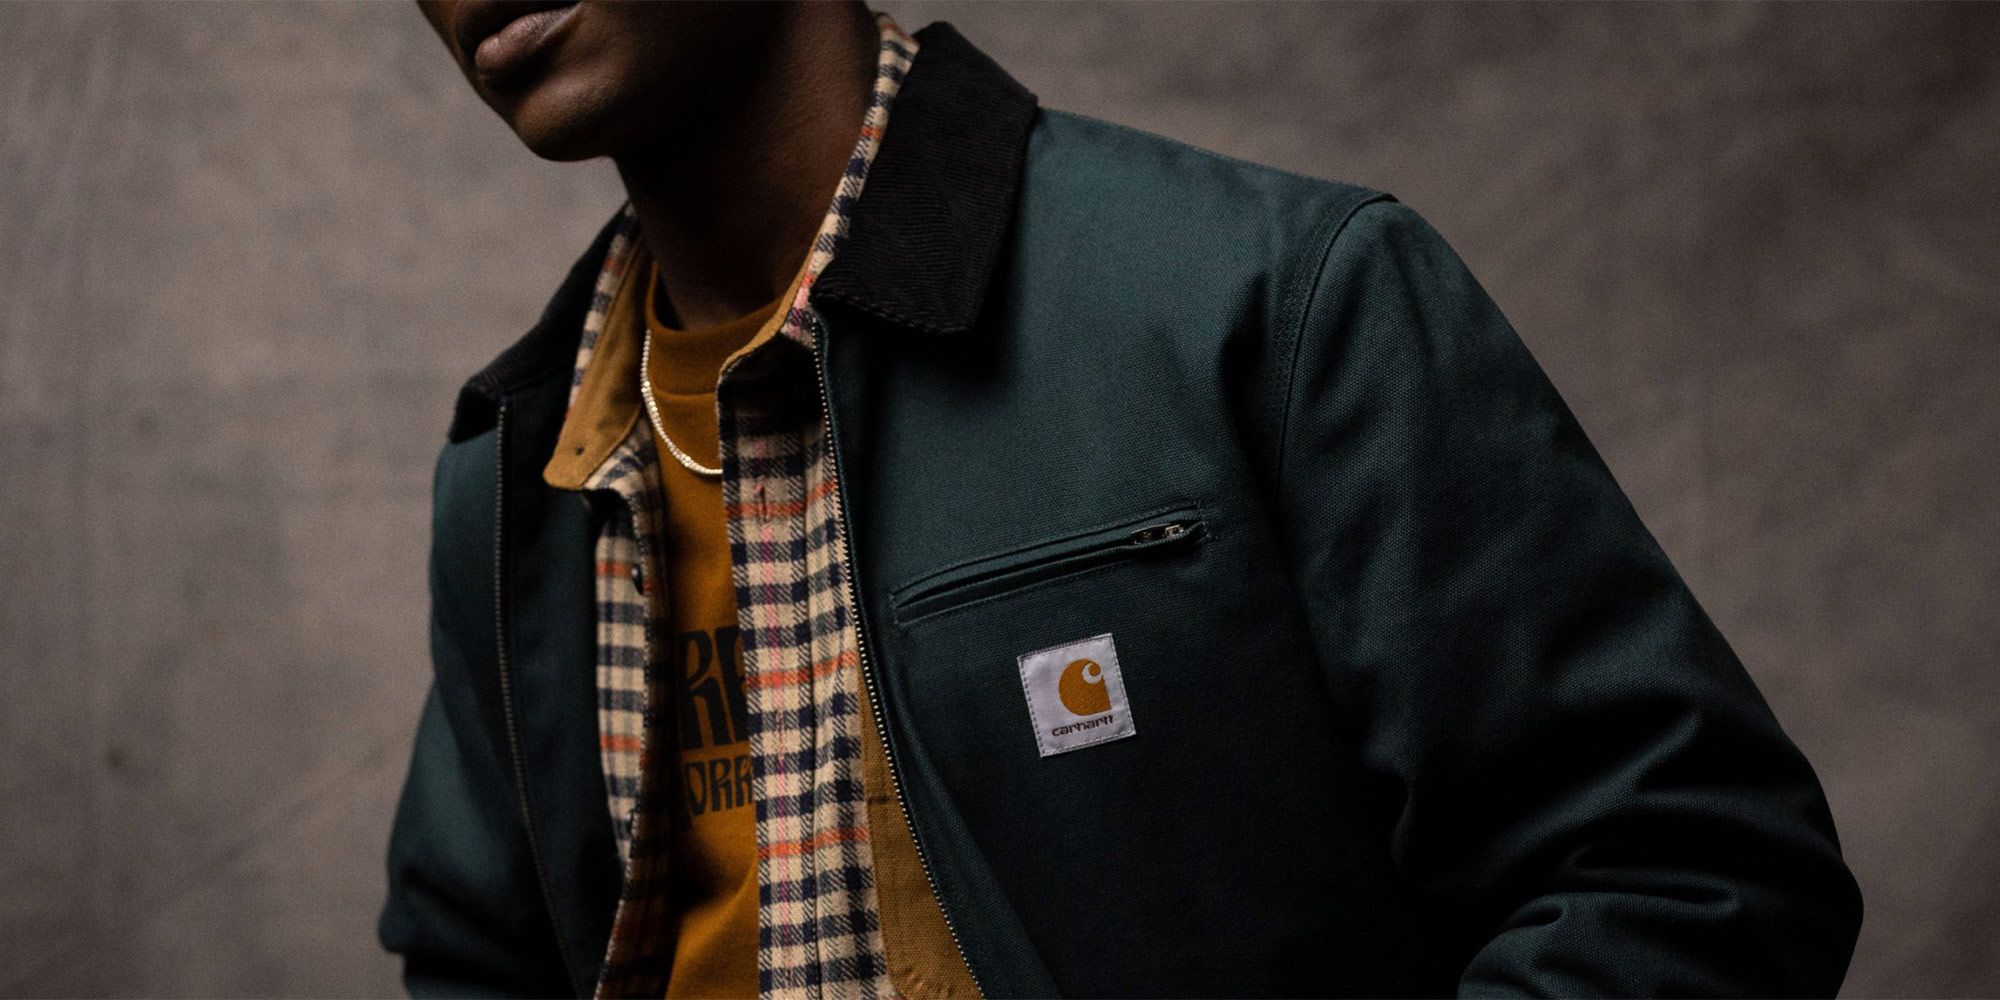 Carhartt Detroit Jacket - A Classic Workwear Piece for the Toughest Conditions"